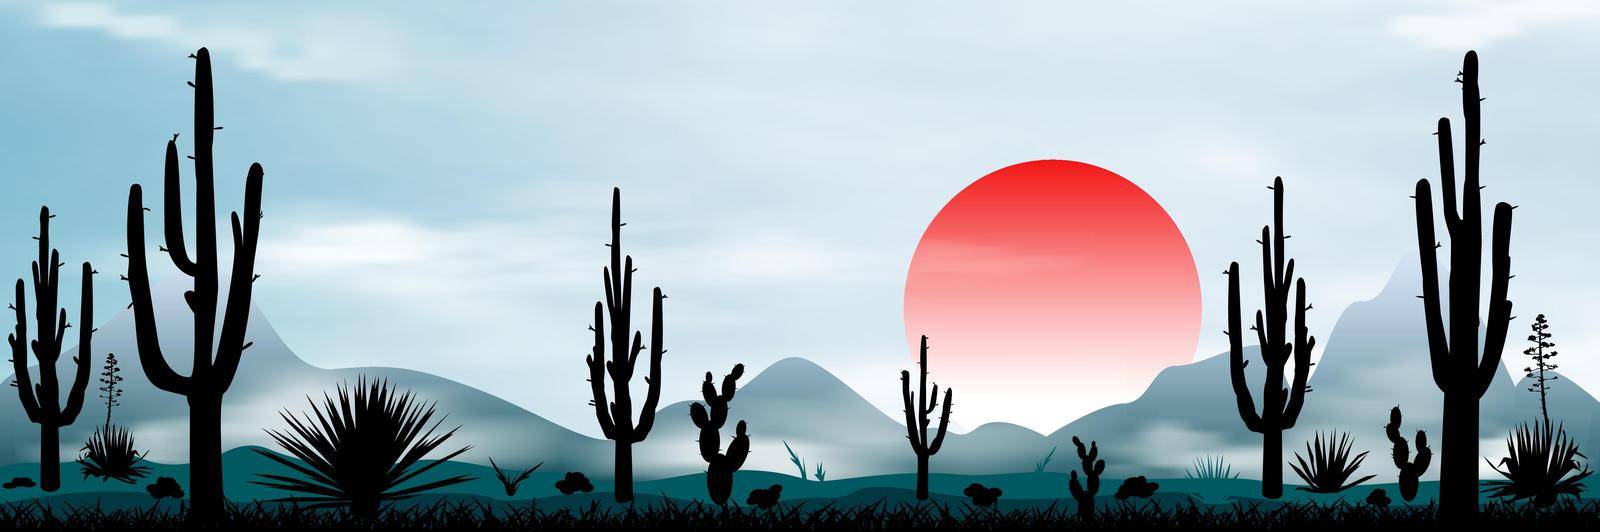 Sunrise in the Mexican desert. Silhouettes of stones, cacti and plants. Desert landscape with cacti. Rocky desert.